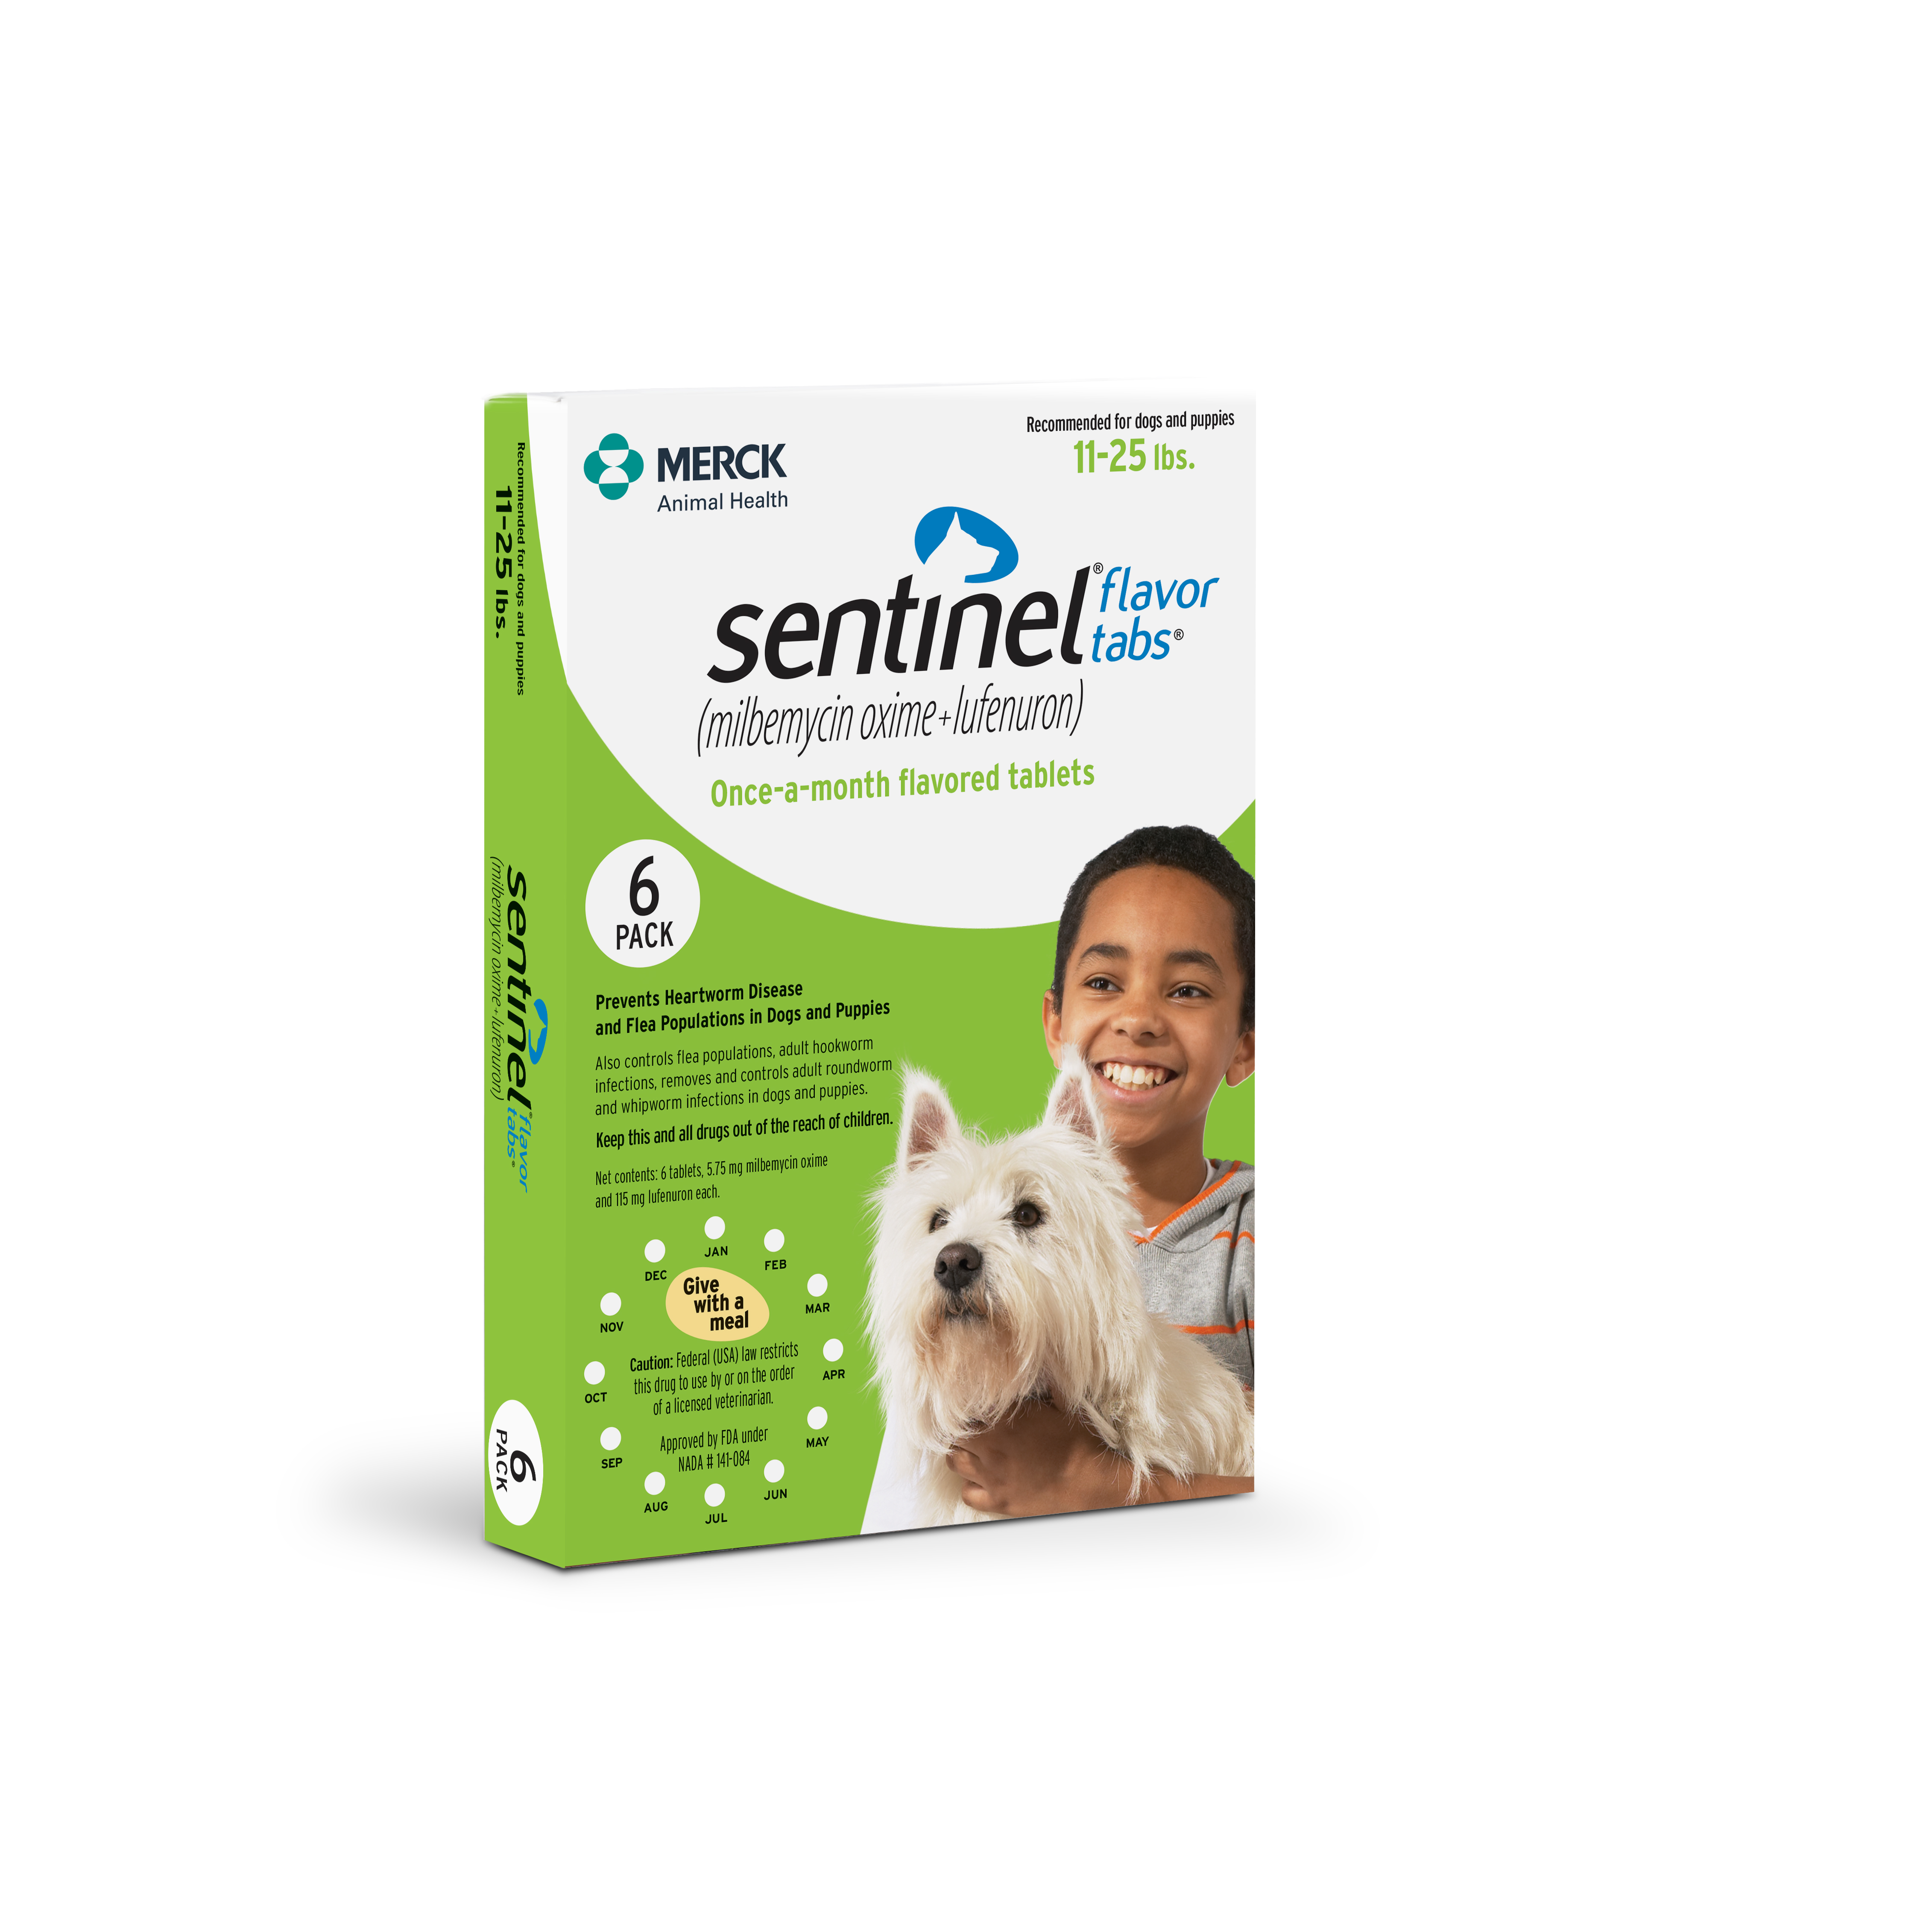 sentinel-flavor-tabs-for-dogs-11-25-lbs-6-pack-green-vetdepot